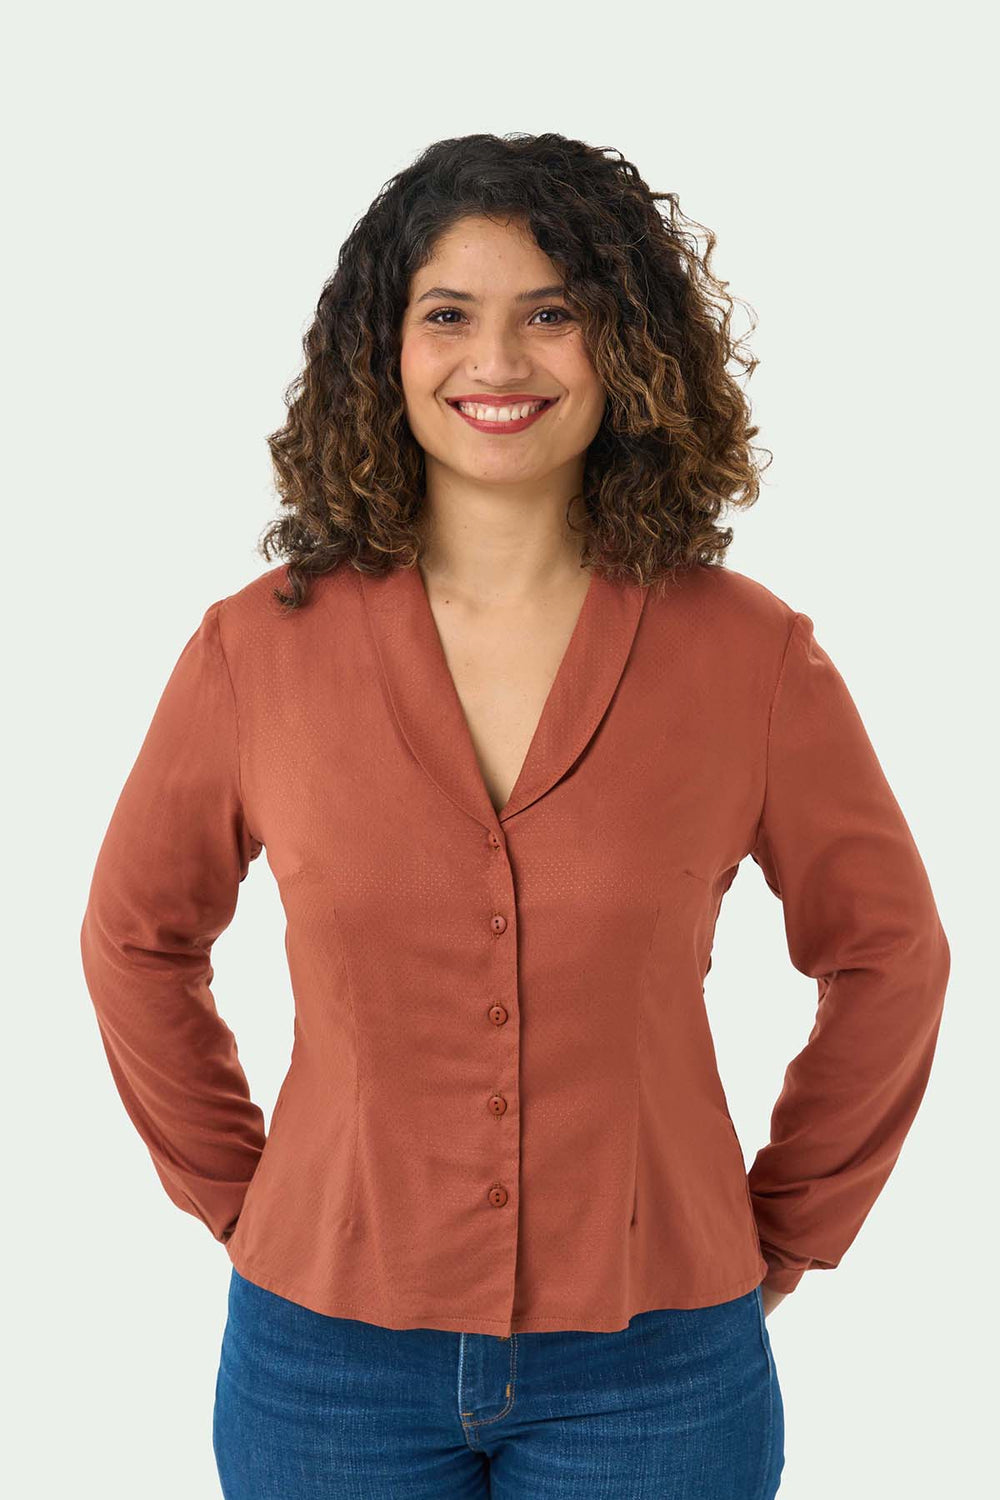 Woman wearing the Lilian Blouse sewing pattern from Sew Over It on The Fold Line. A blouse pattern made in rayon, viscose or crepe fabrics, featuring a button front, shawl collar, full length sleeves with narrow cuff, V-neck, front and back double-ended d